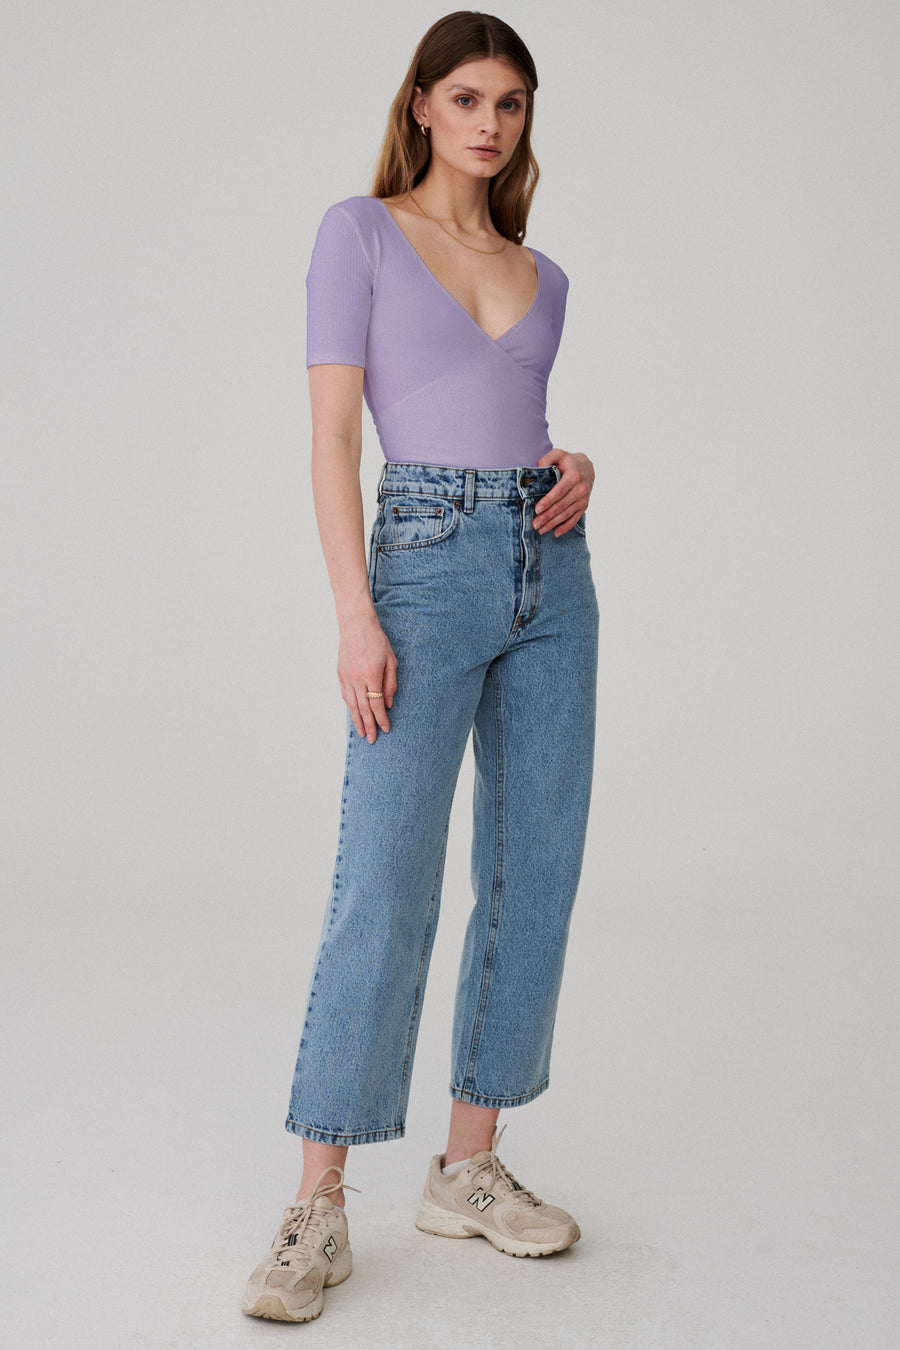 Bodysuit in organic cotton / 01 / 04 / acai fruit *cropped-jeans-from-recycled-cotton-05-12* ?The model is 177 cm high and wears size S?